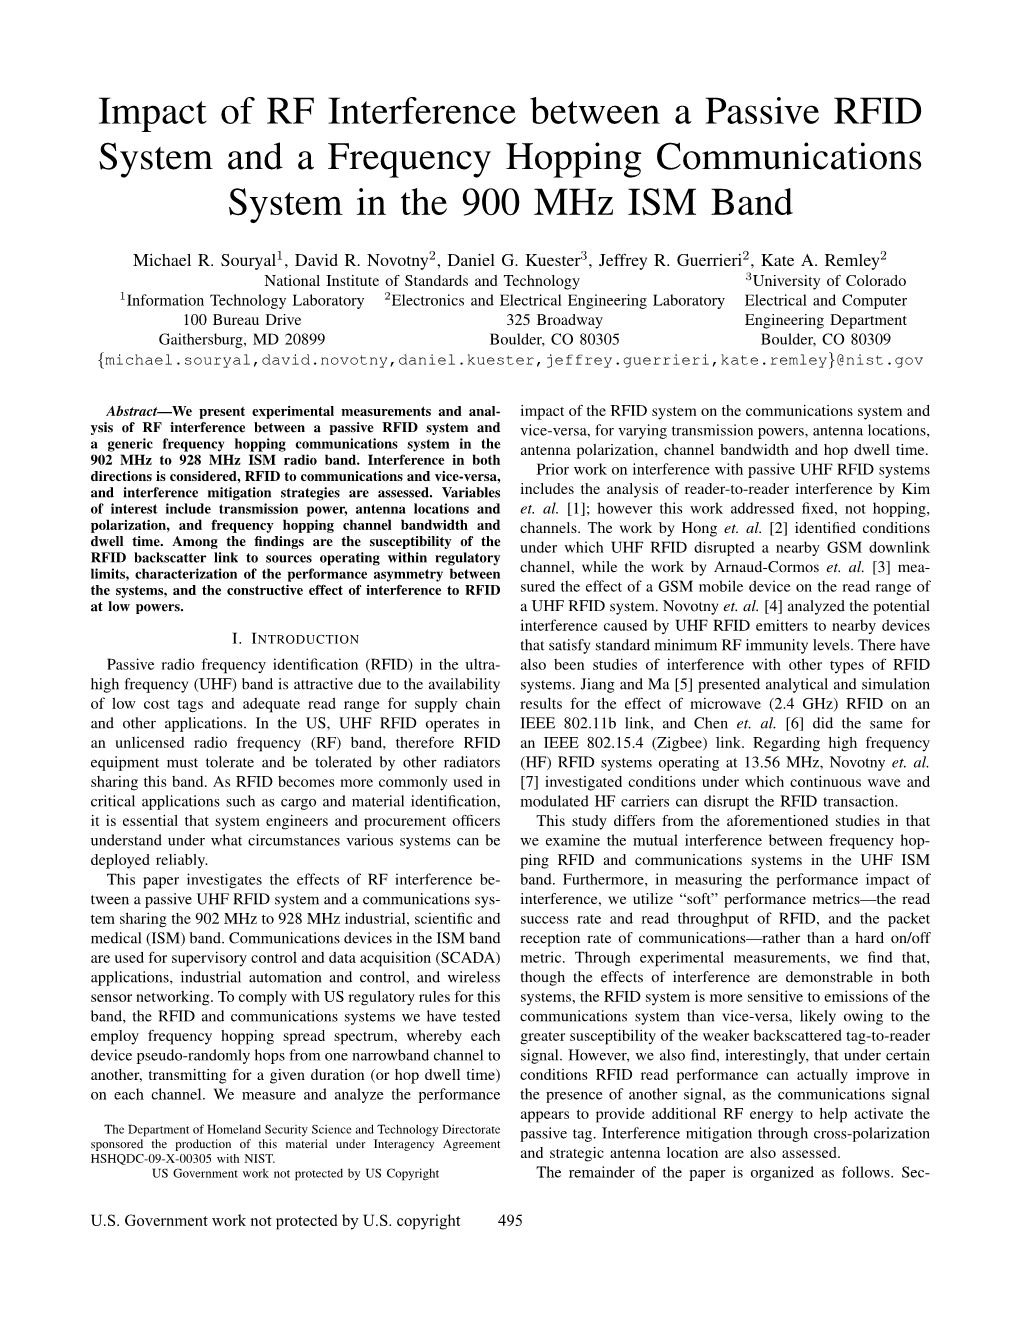 Impact of RF Interference Between a Passive RFID System and a Frequency Hopping Communications System in the 900 Mhz ISM Band